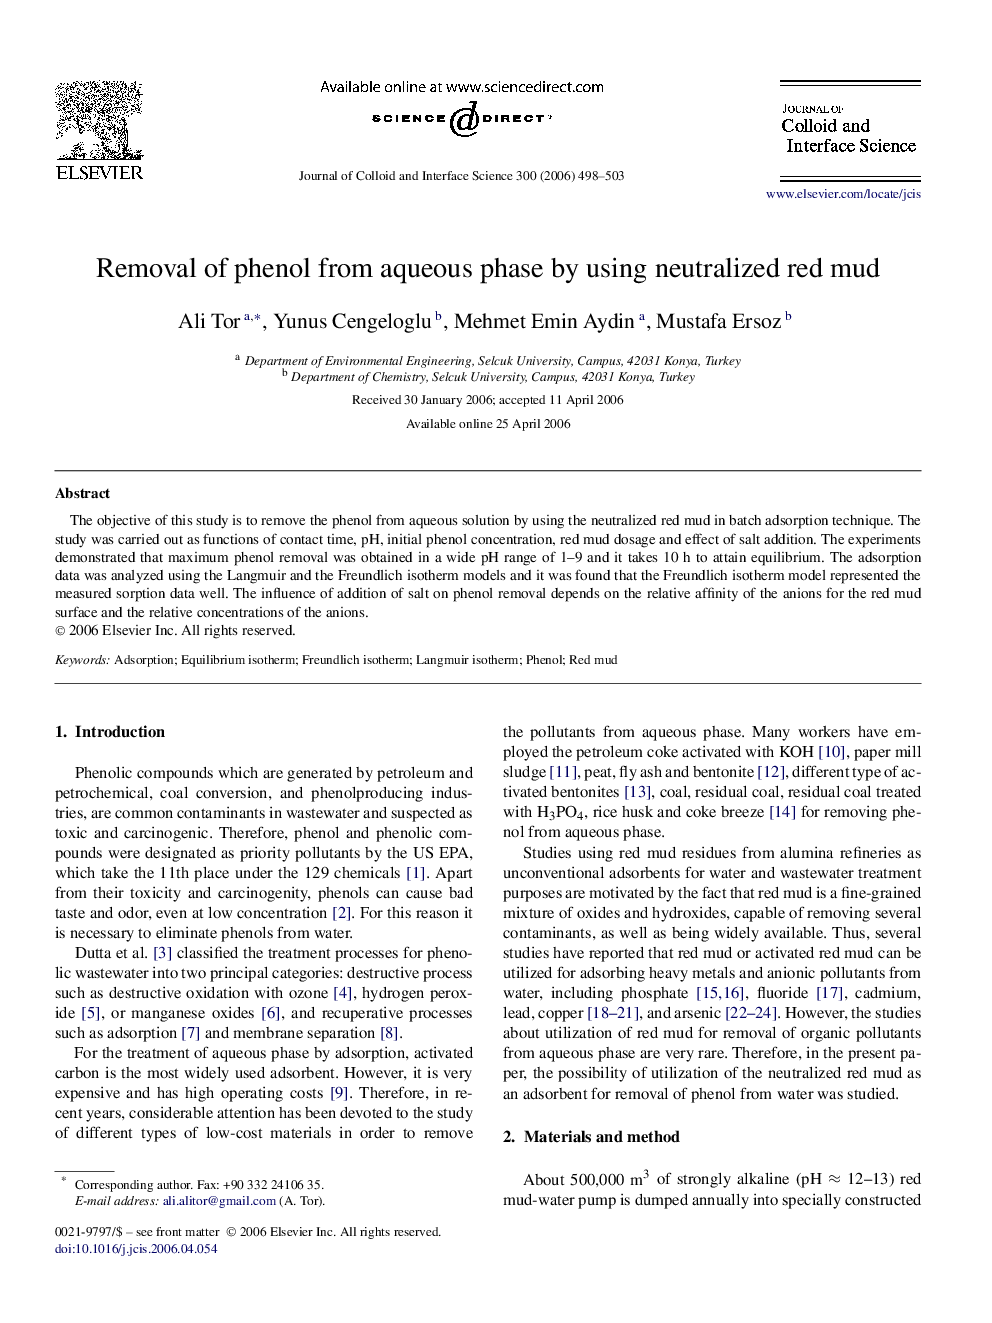 Removal of phenol from aqueous phase by using neutralized red mud